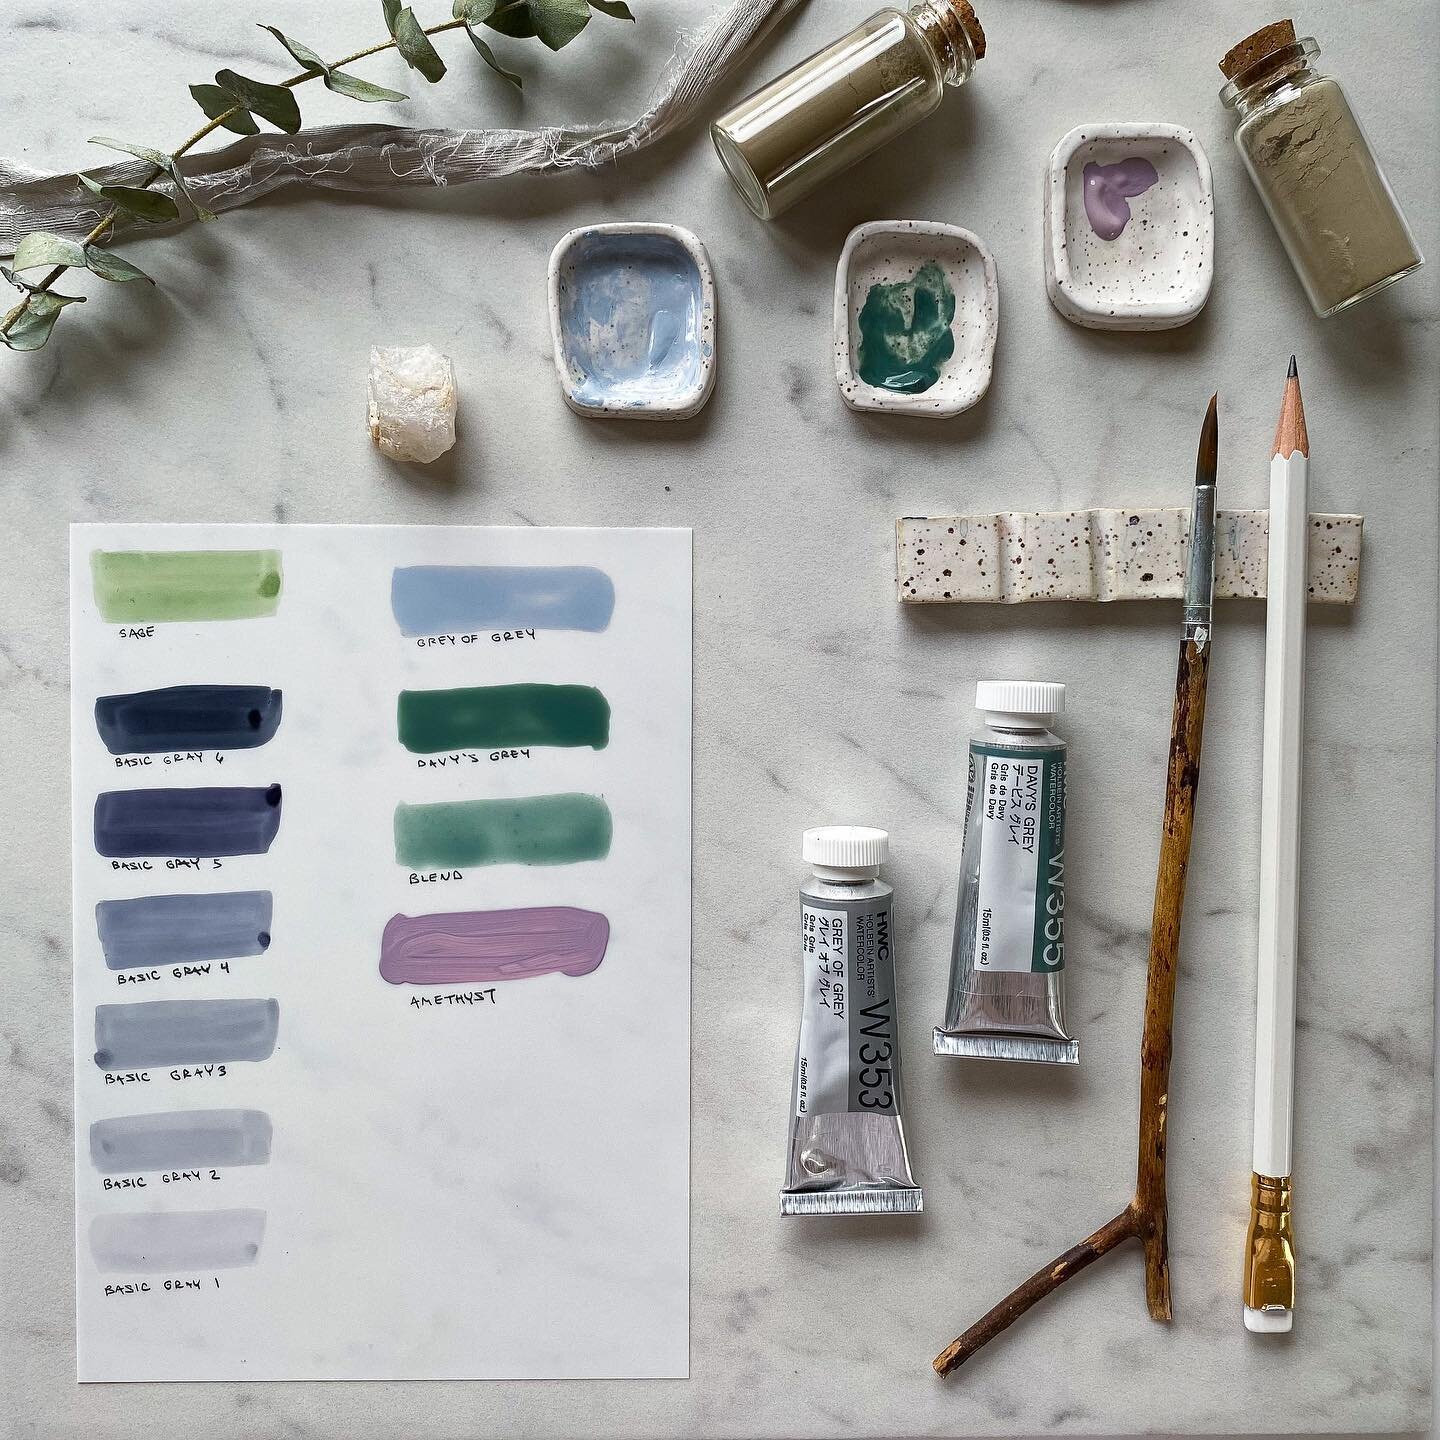 beautiful messes // new art supplies + mixing colors = happy heart. how are you finding moments of play in your day?
xoxo